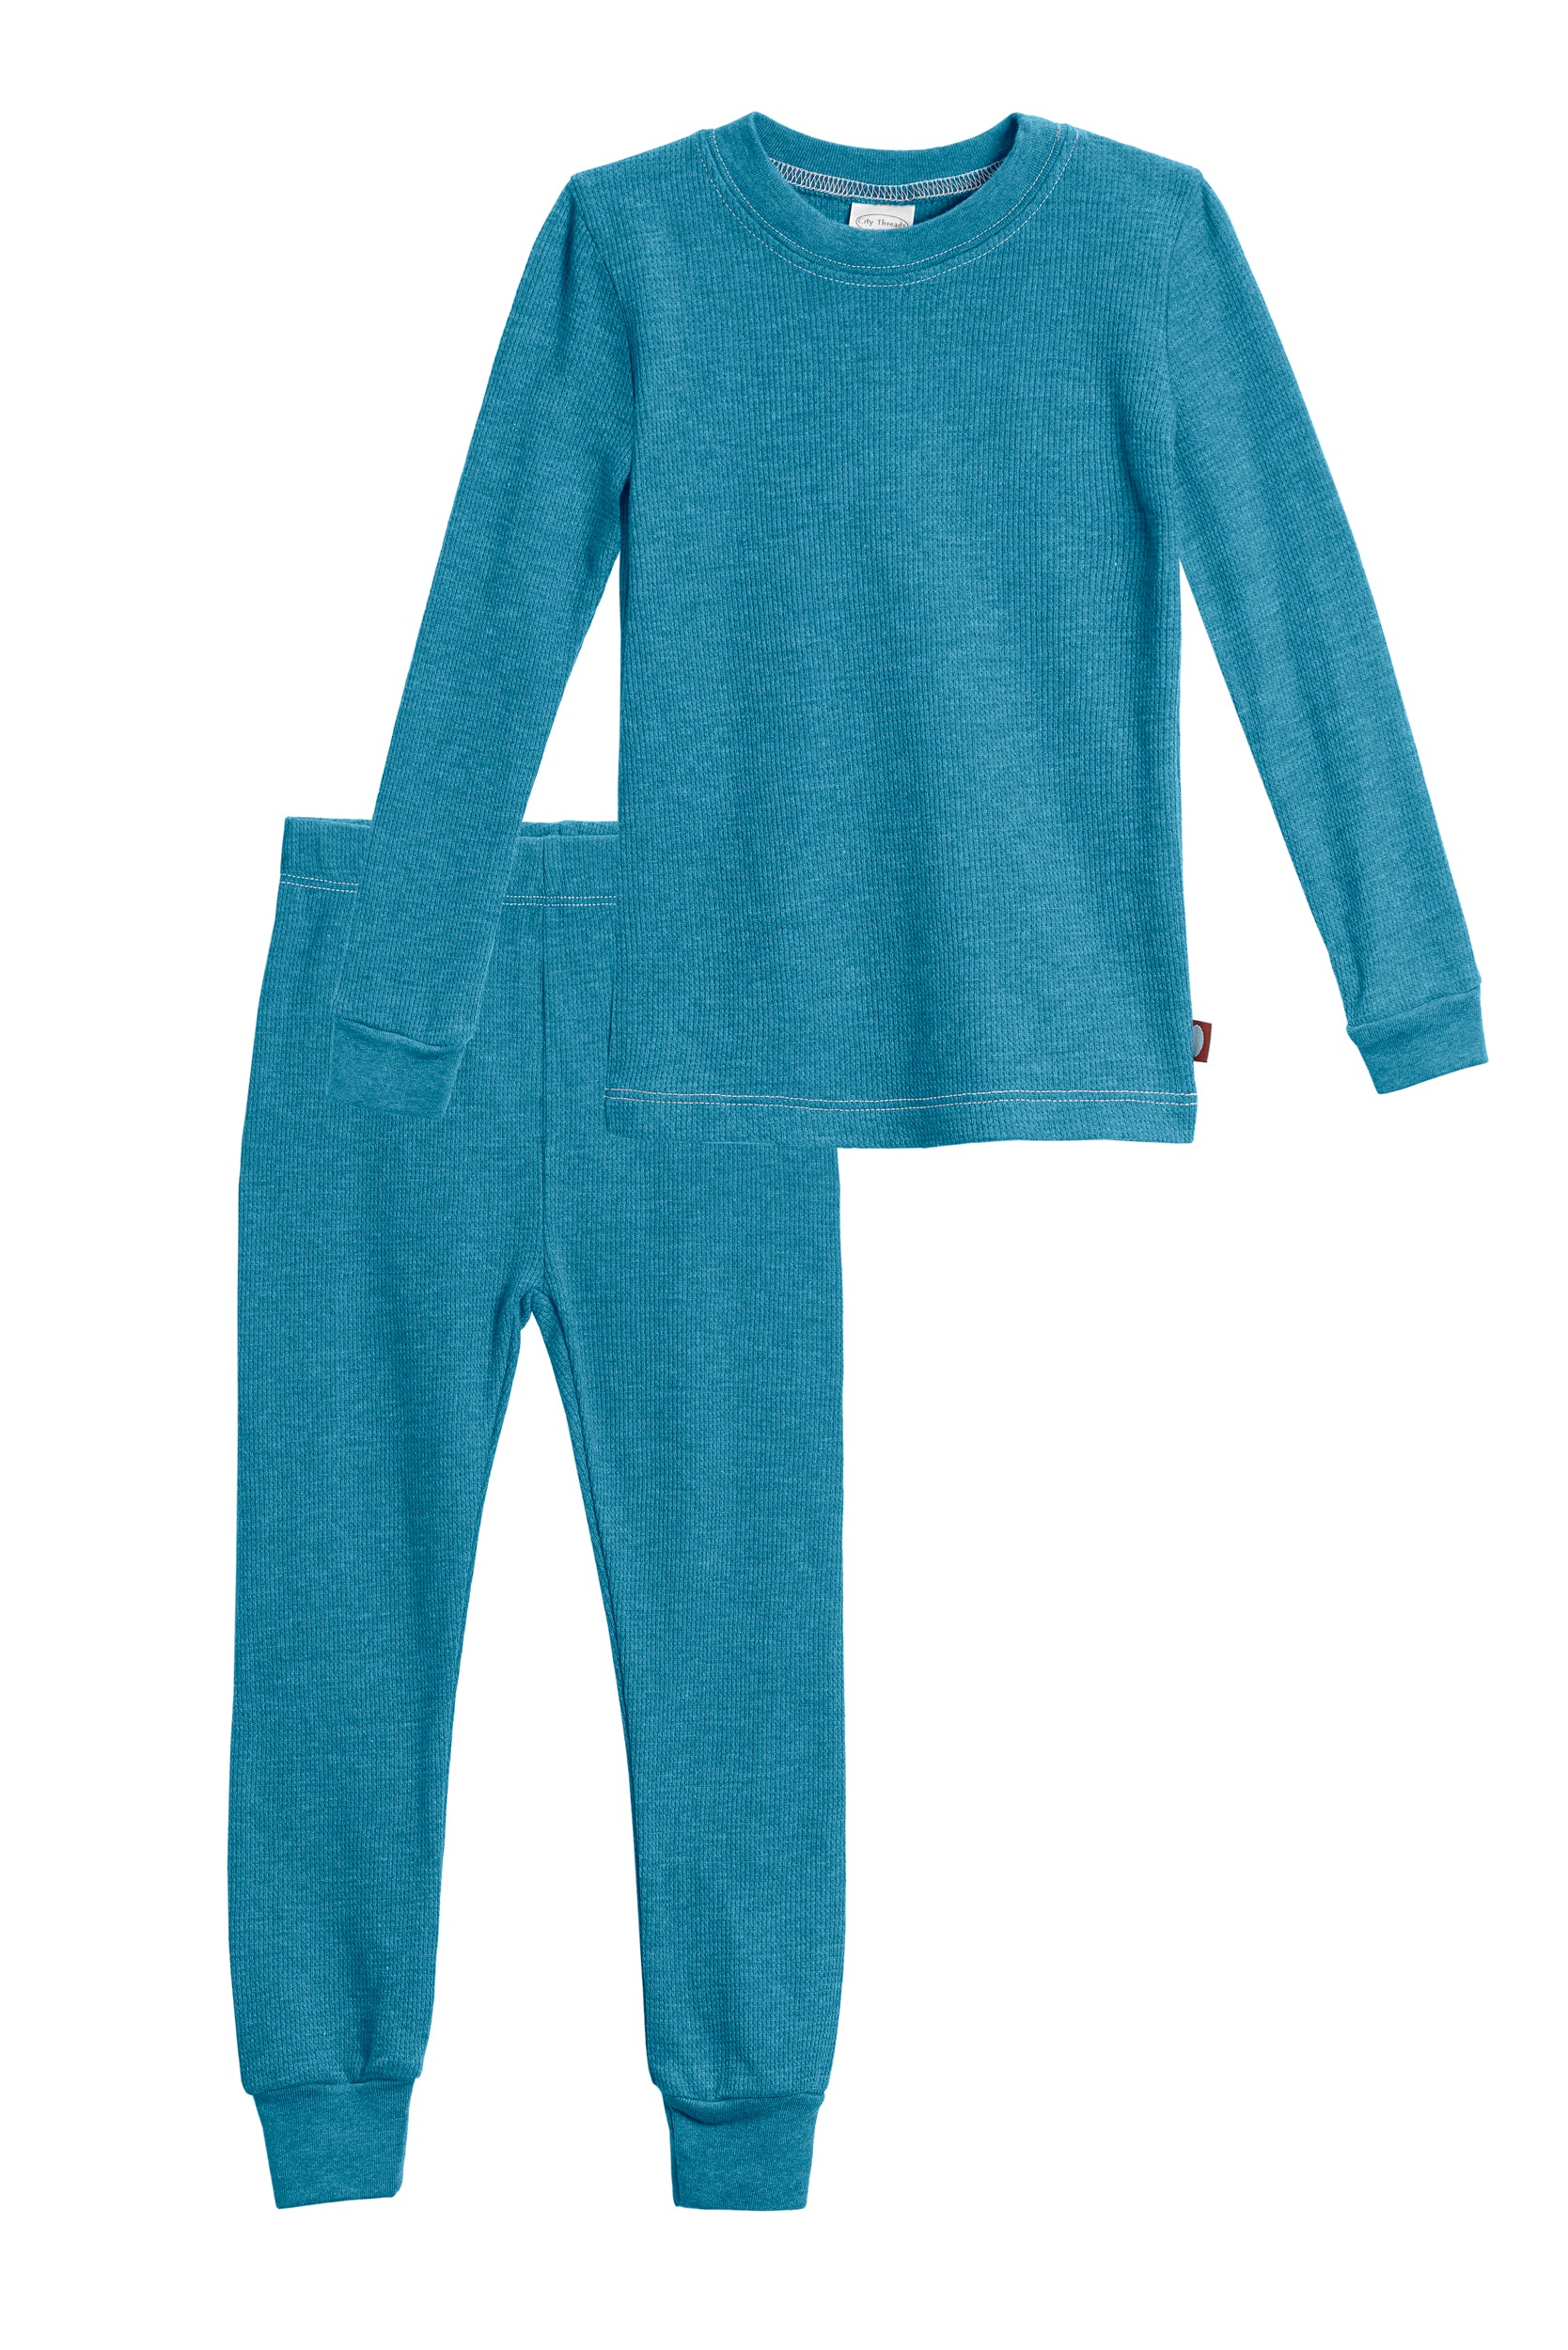 children's long johns top & bottom set cotton baby thermal